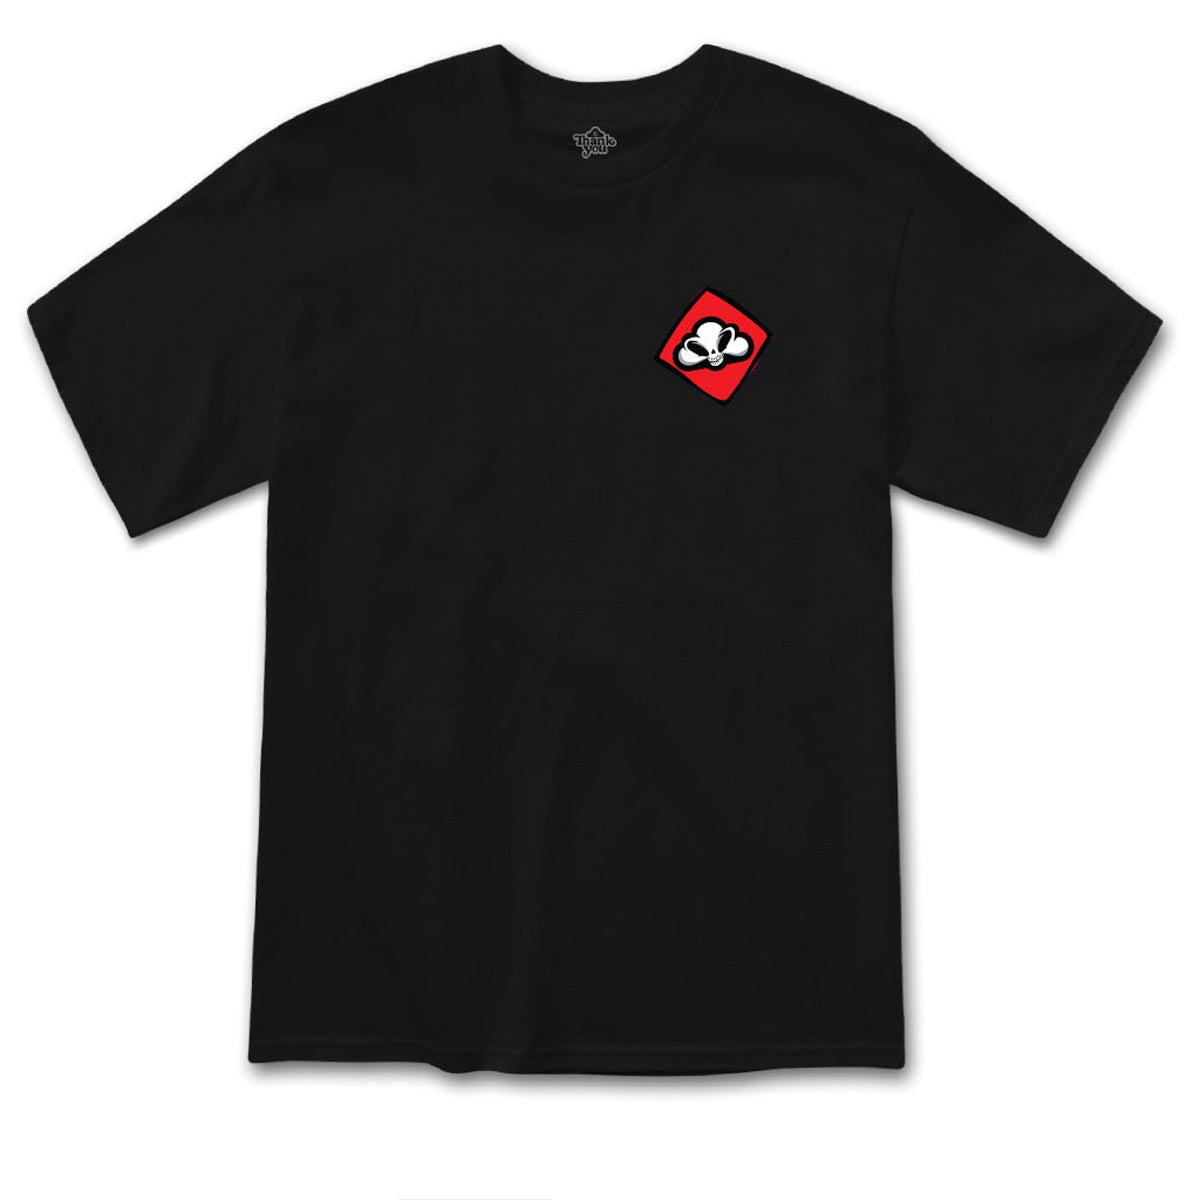 Thank You x Ronnie Creager Turntable T-Shirt - Black image 2